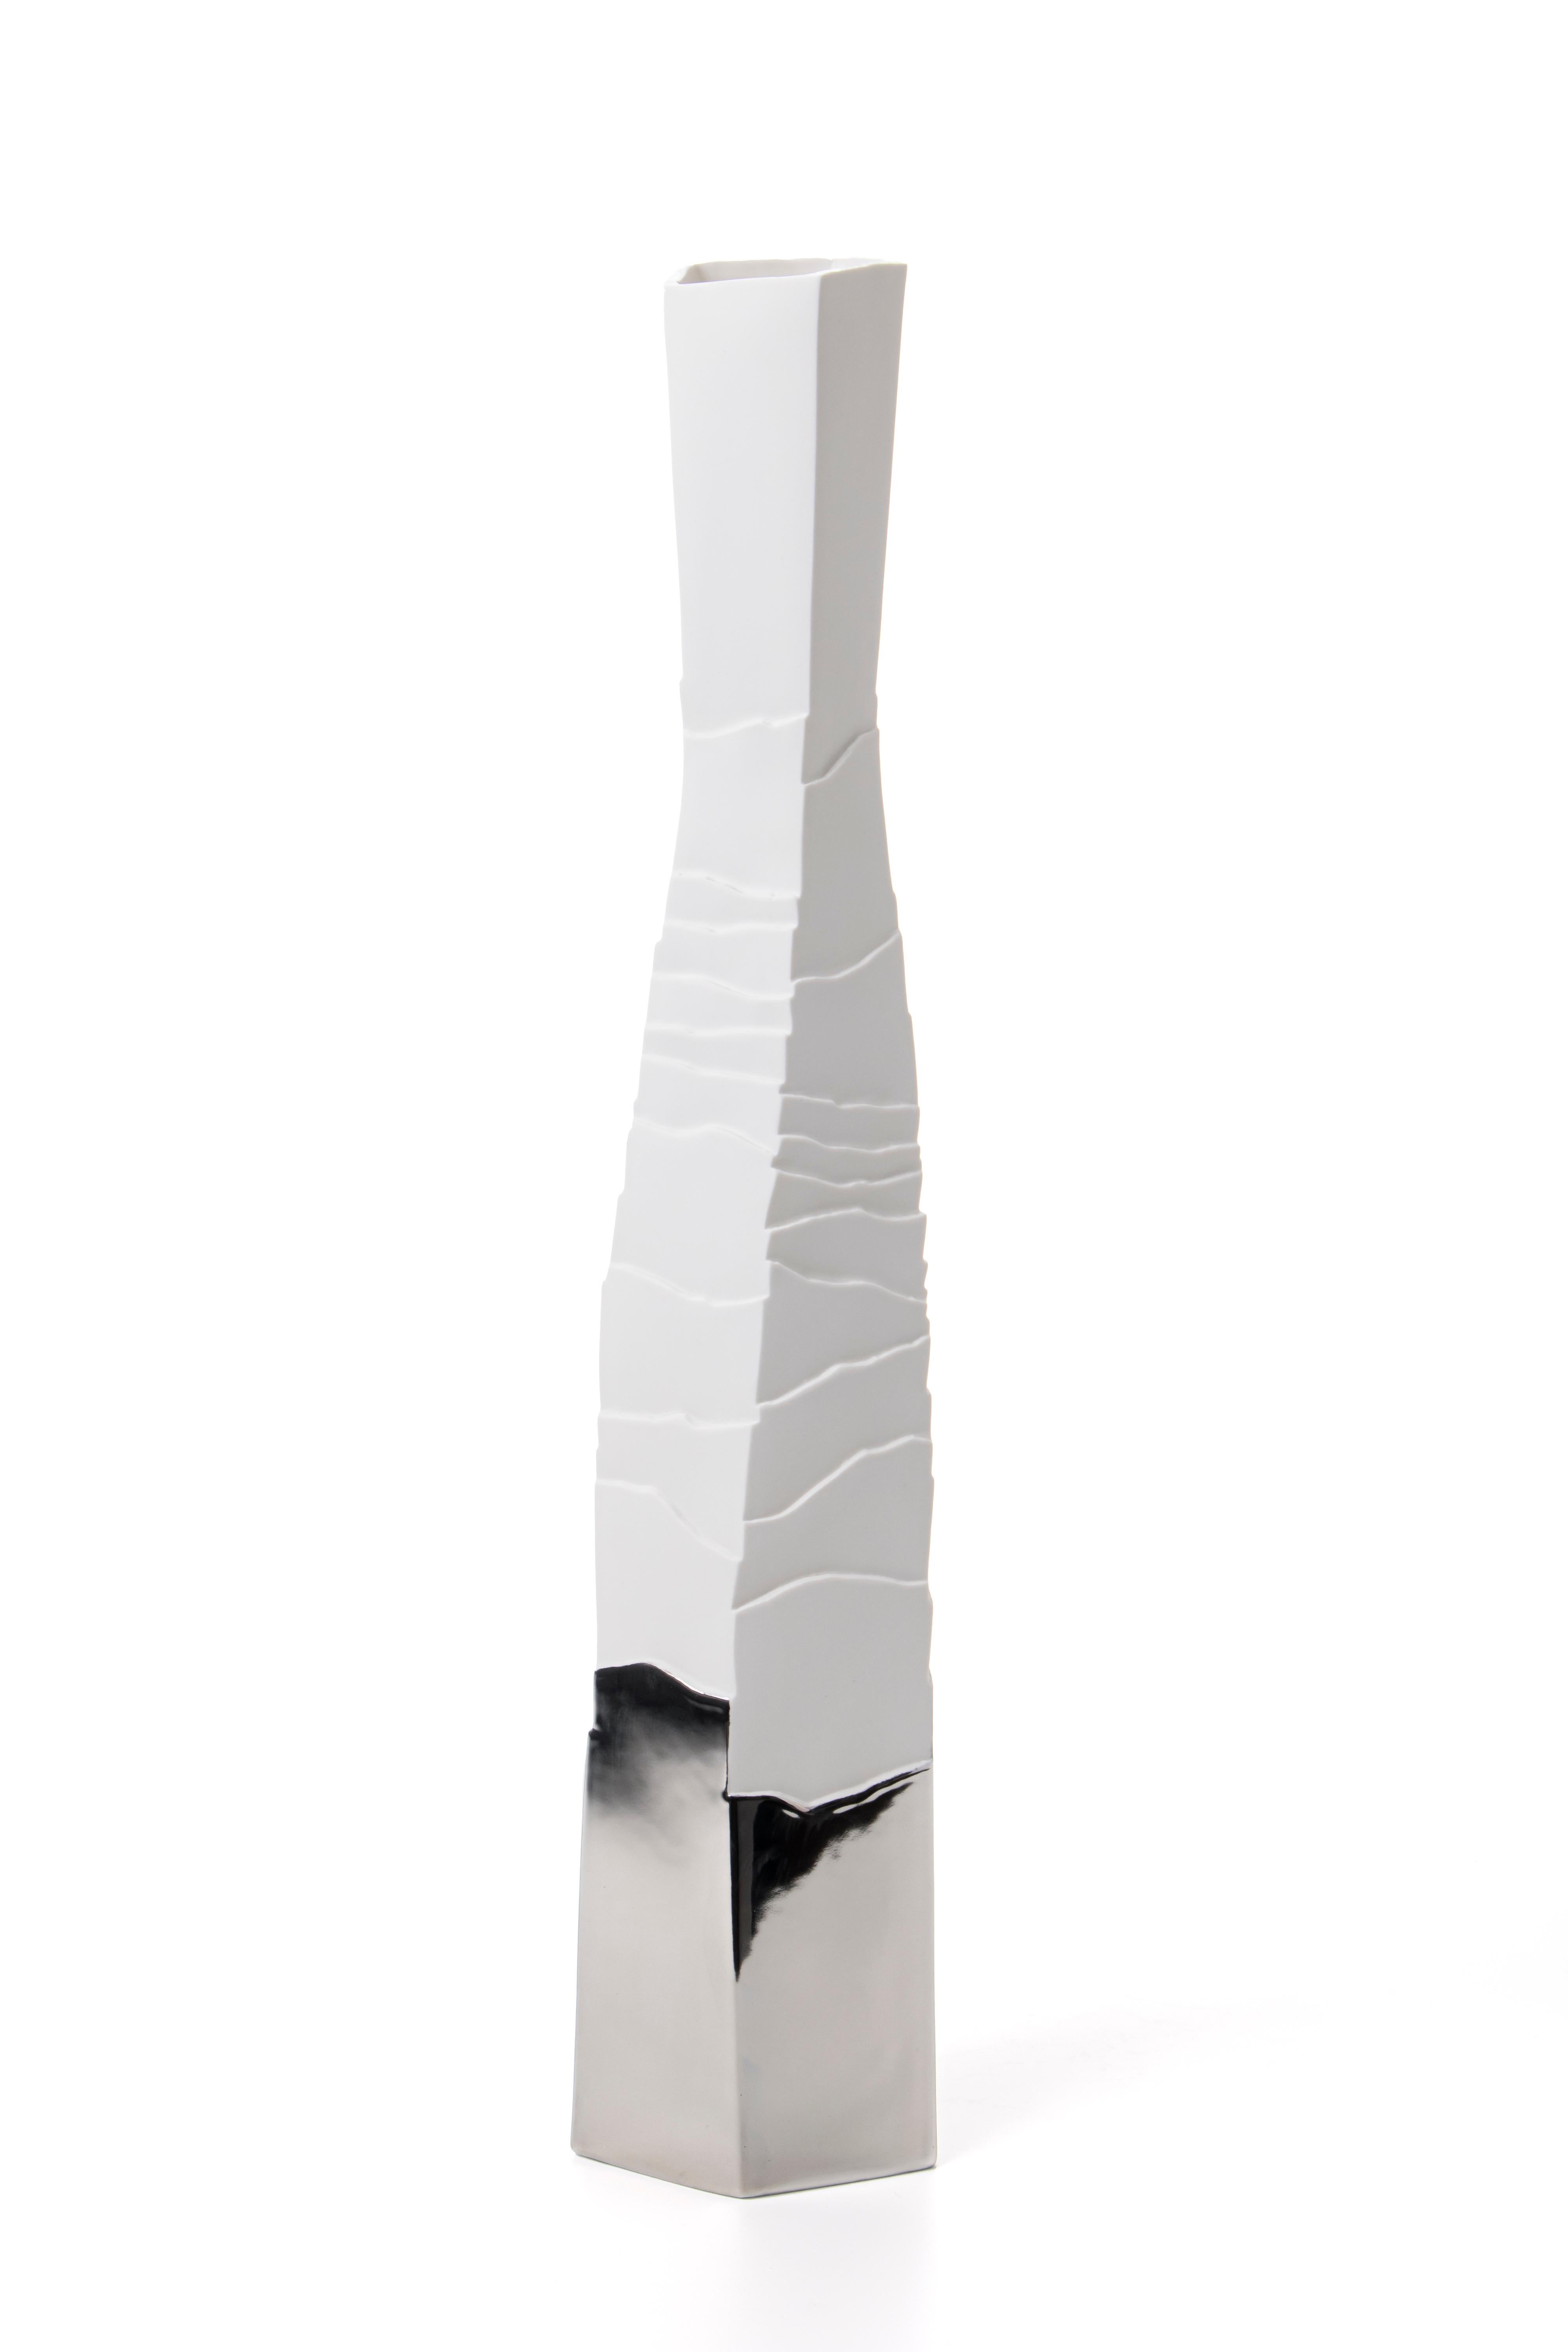 Dense layers and smooth surfaces interrupted by irregular ridges, memory of eroded rocks.
Contemporary porcelain object for elegant interiors. 
This vase is decorated by hand with precious platinum, fixed through an additional meticulous firing